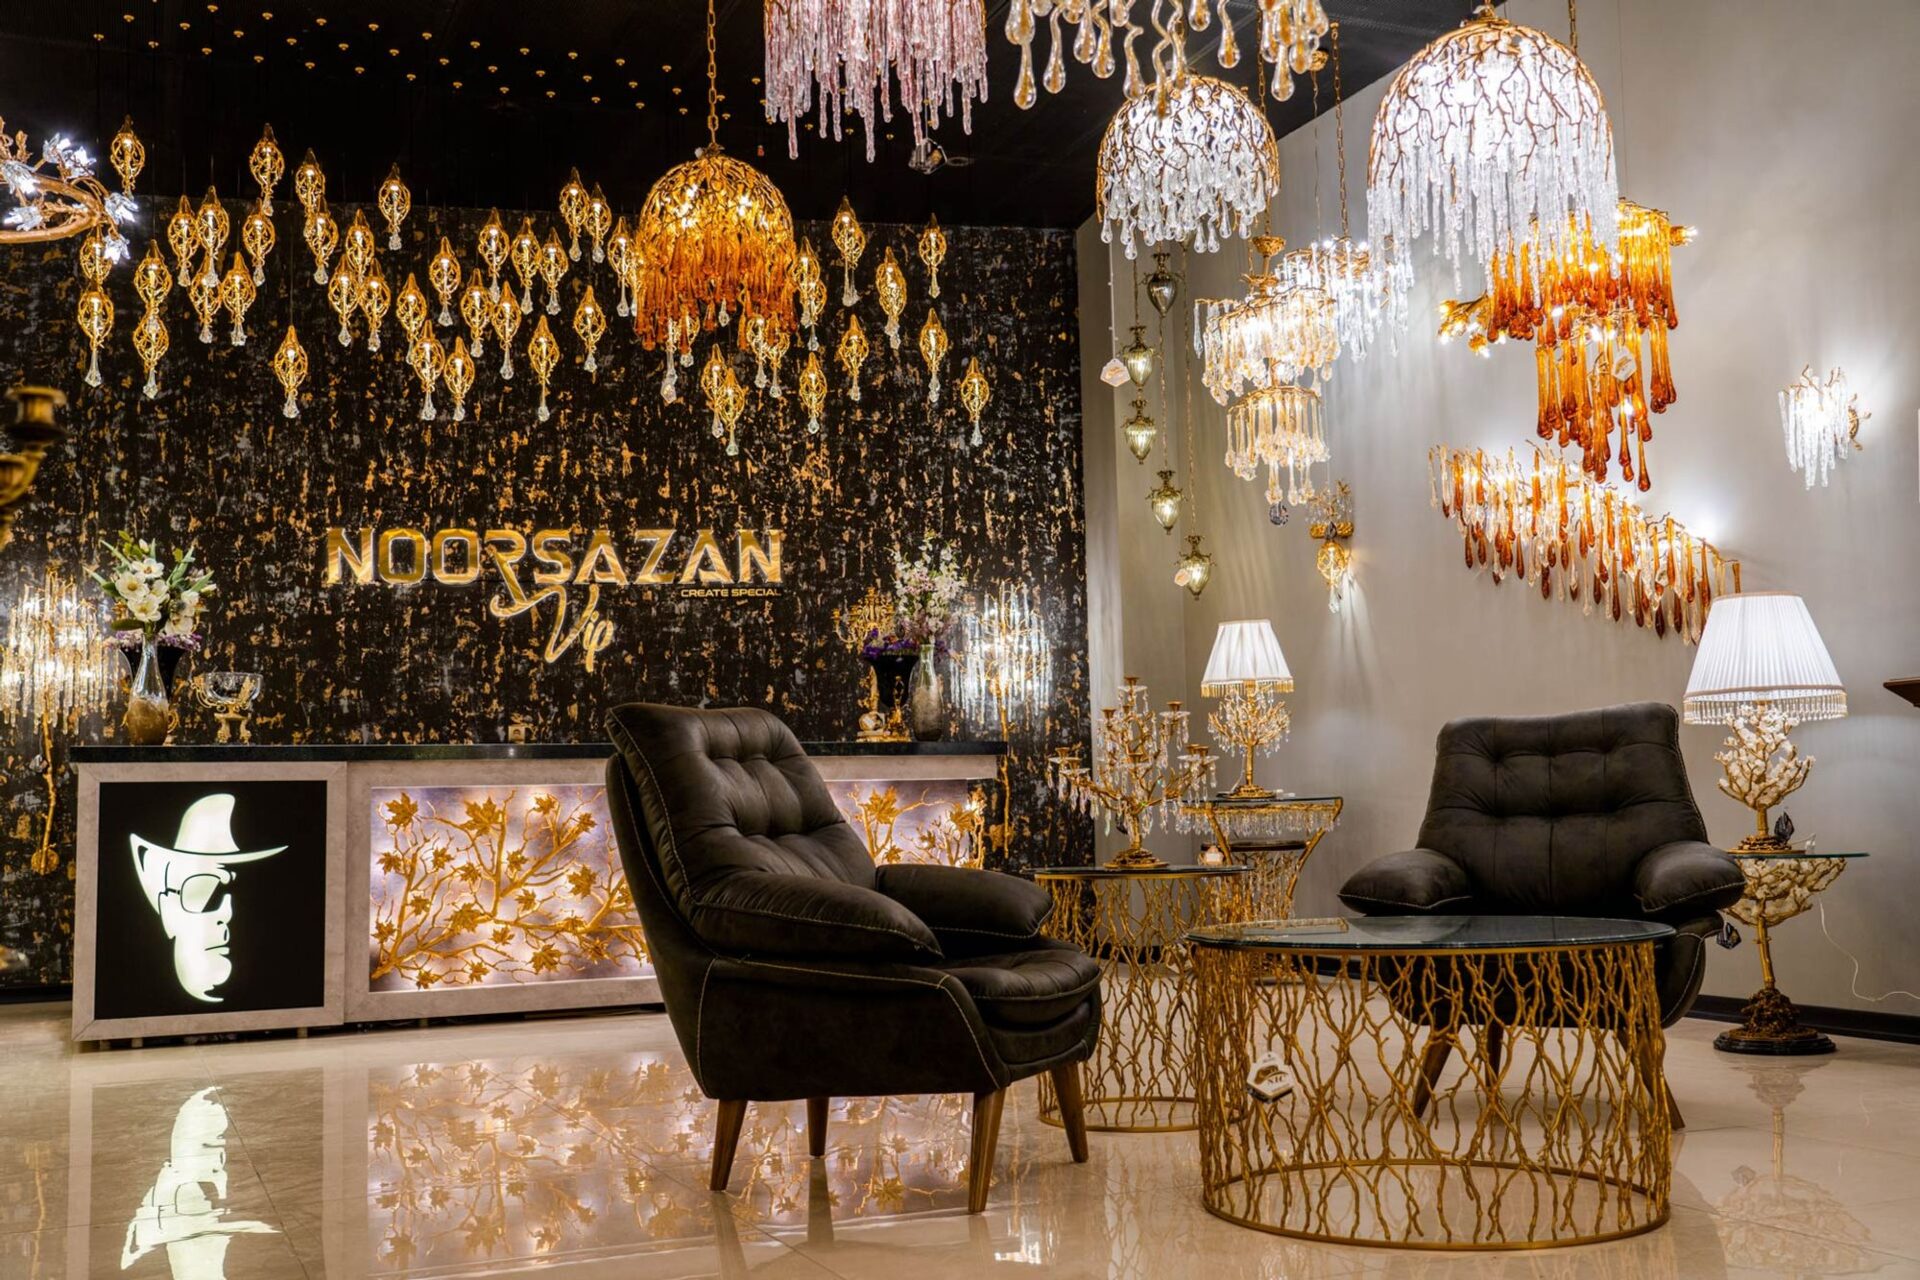 Photo of Noorsazan Niavaran Store: A snapshot of the exterior of Noorsazan Industrial Complex's Niavaran store, the largest chandelier, lighting, and decoration manufacturer in Iran.